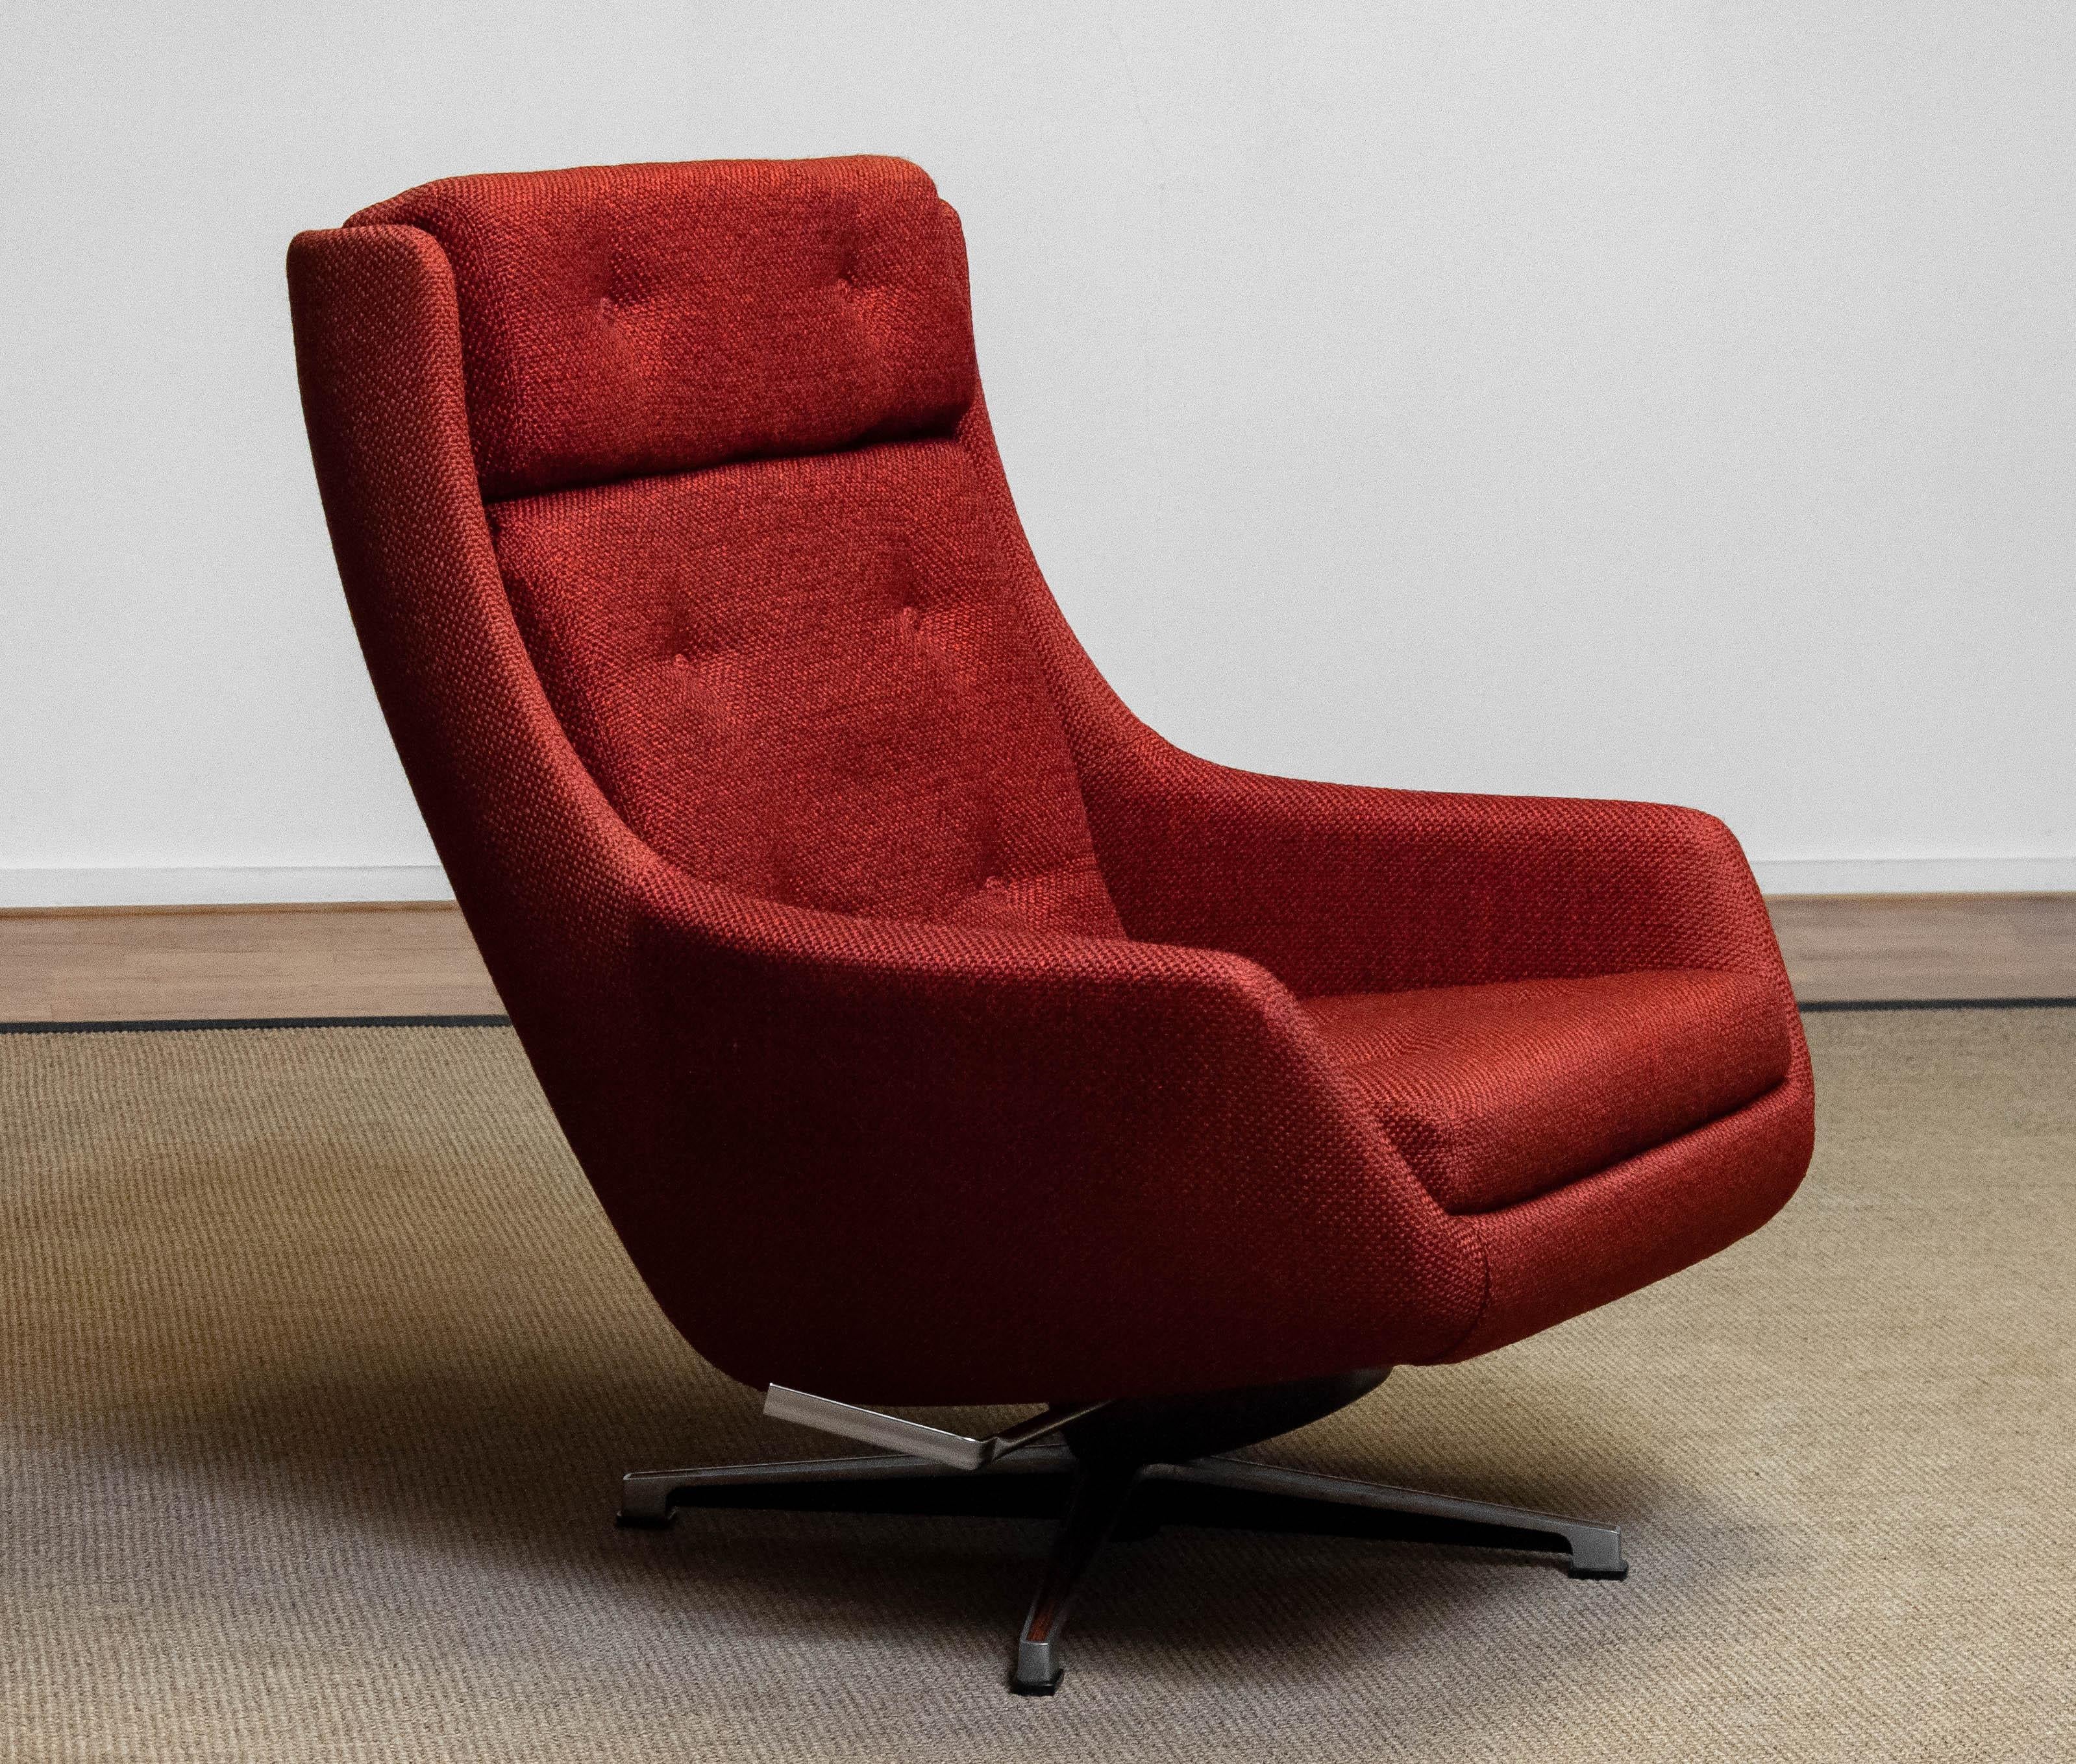 Very comfortable swivel chair combined with rocking option designed by Alf Svensson for Dux of Sweden from the 1960's.
This swivel chair in upholstered with the original red fabric which is still in good condition. The char sits and supports very